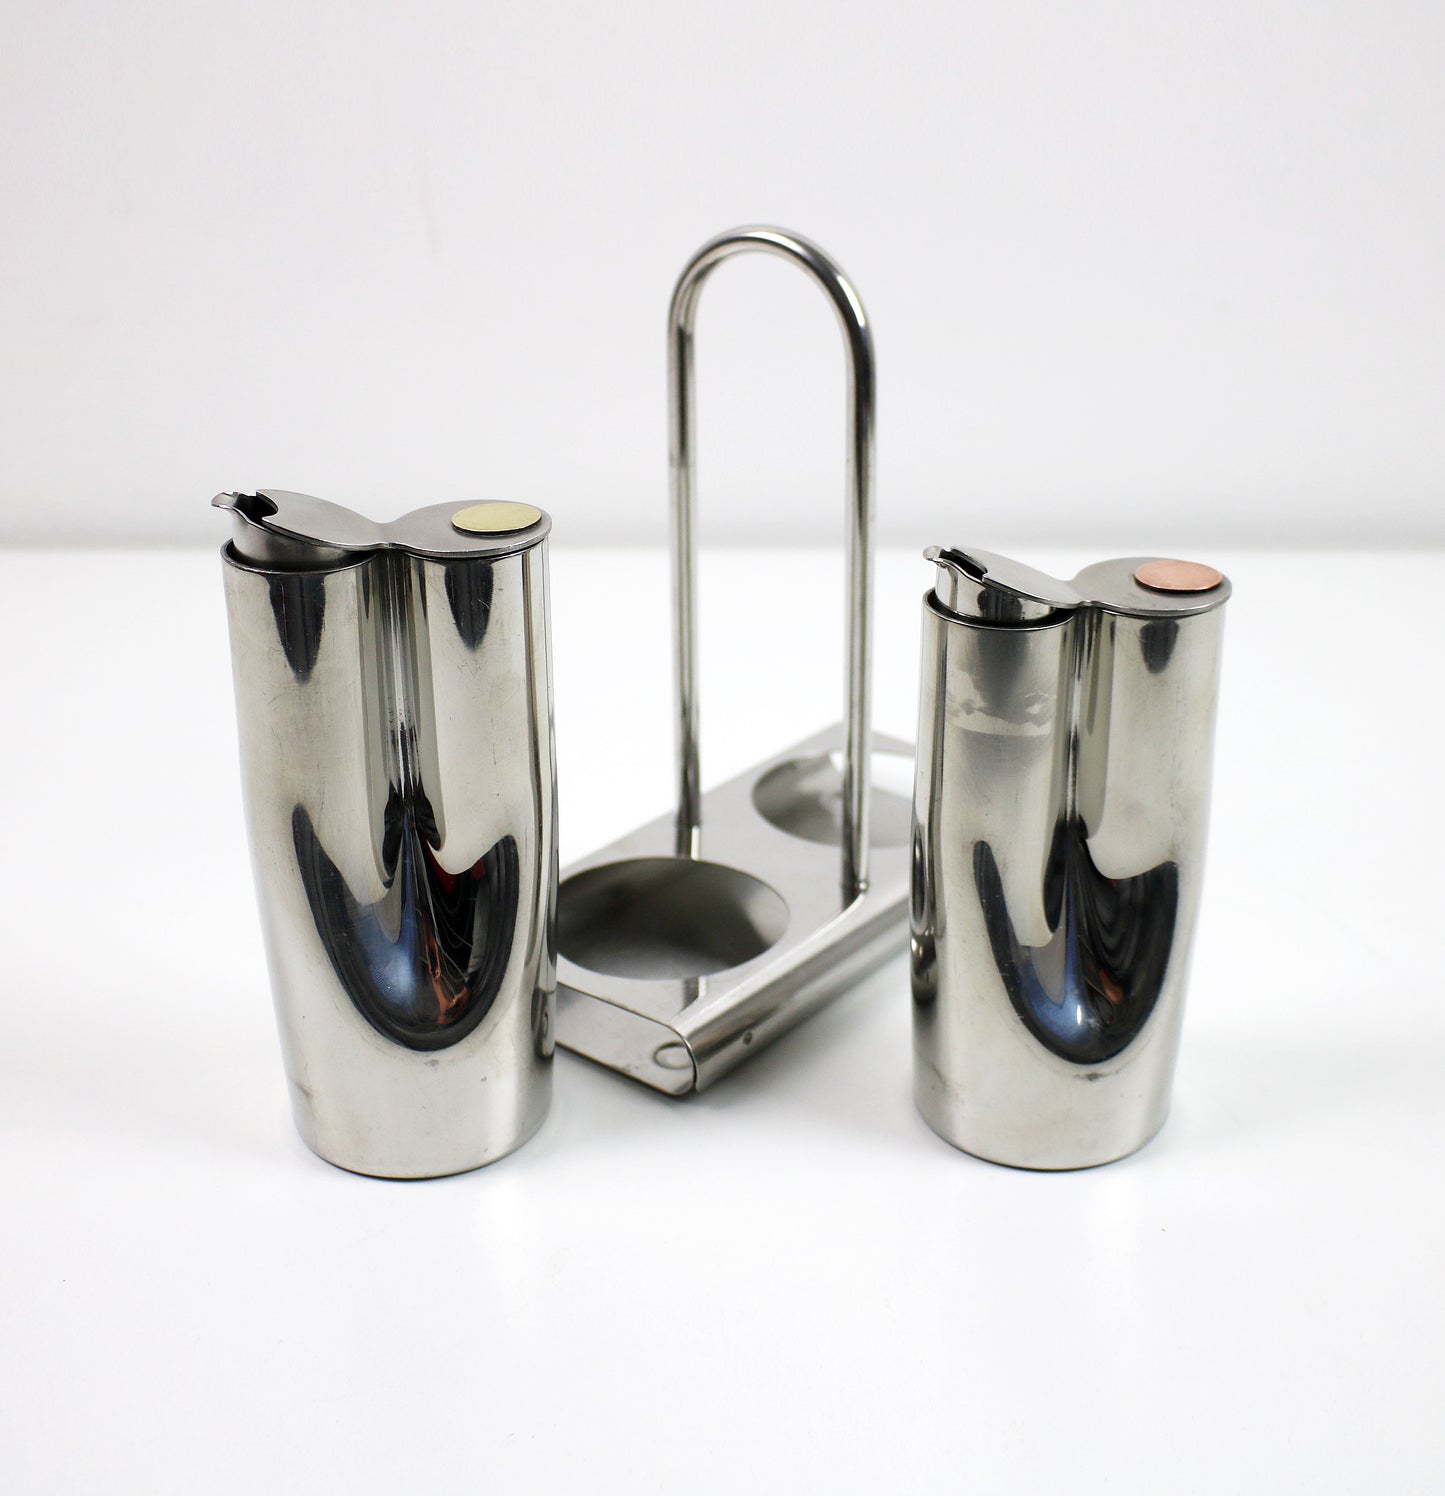 Vintage Italian dressing cruet set in stainless steel, brass and copper by Stella